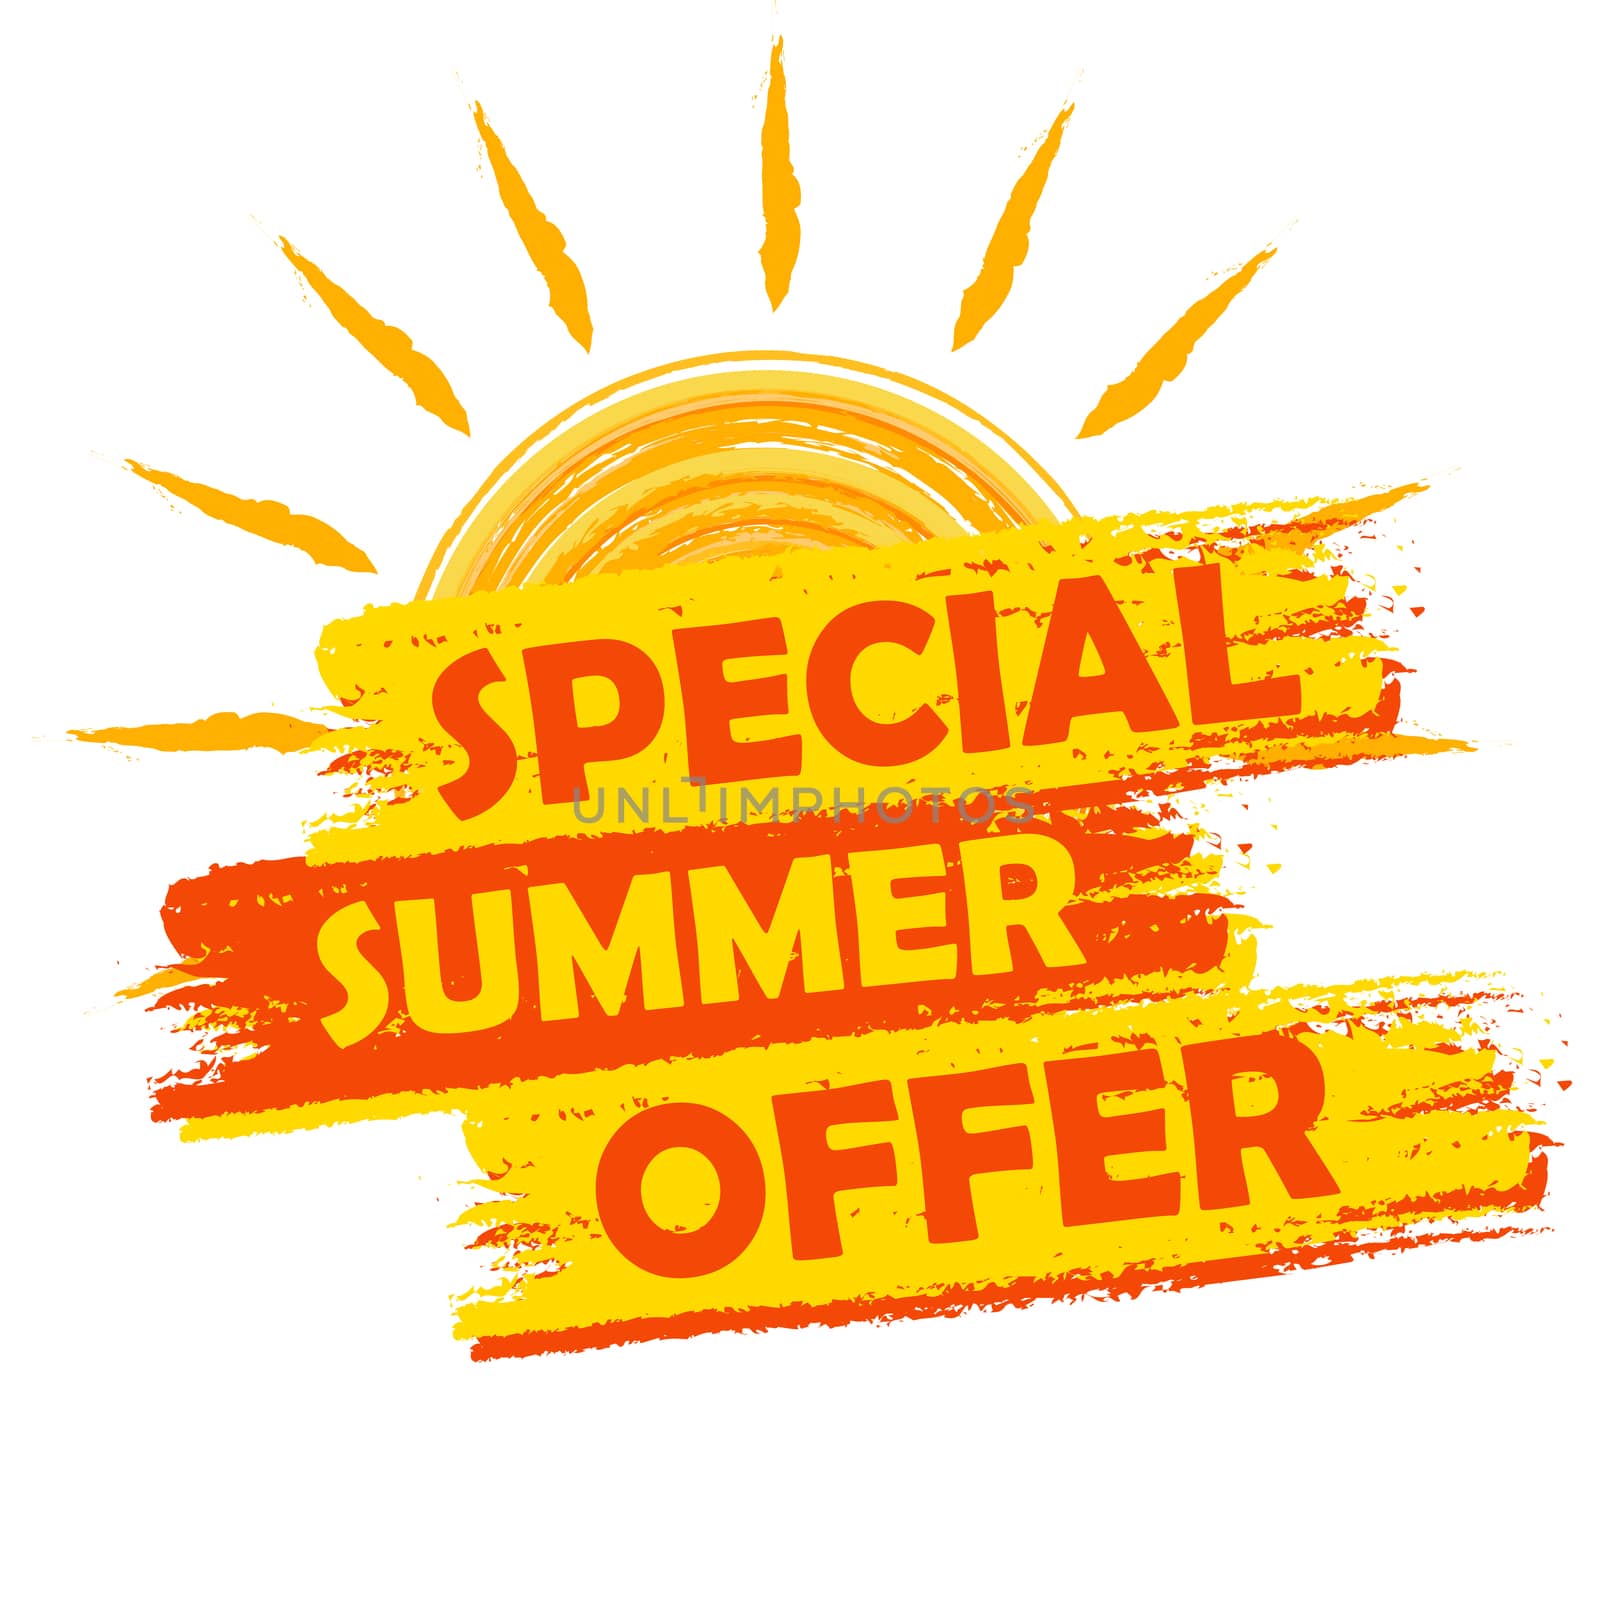 special summer offer banner - text in yellow and orange drawn label with sun symbol, business seasonal shopping concept